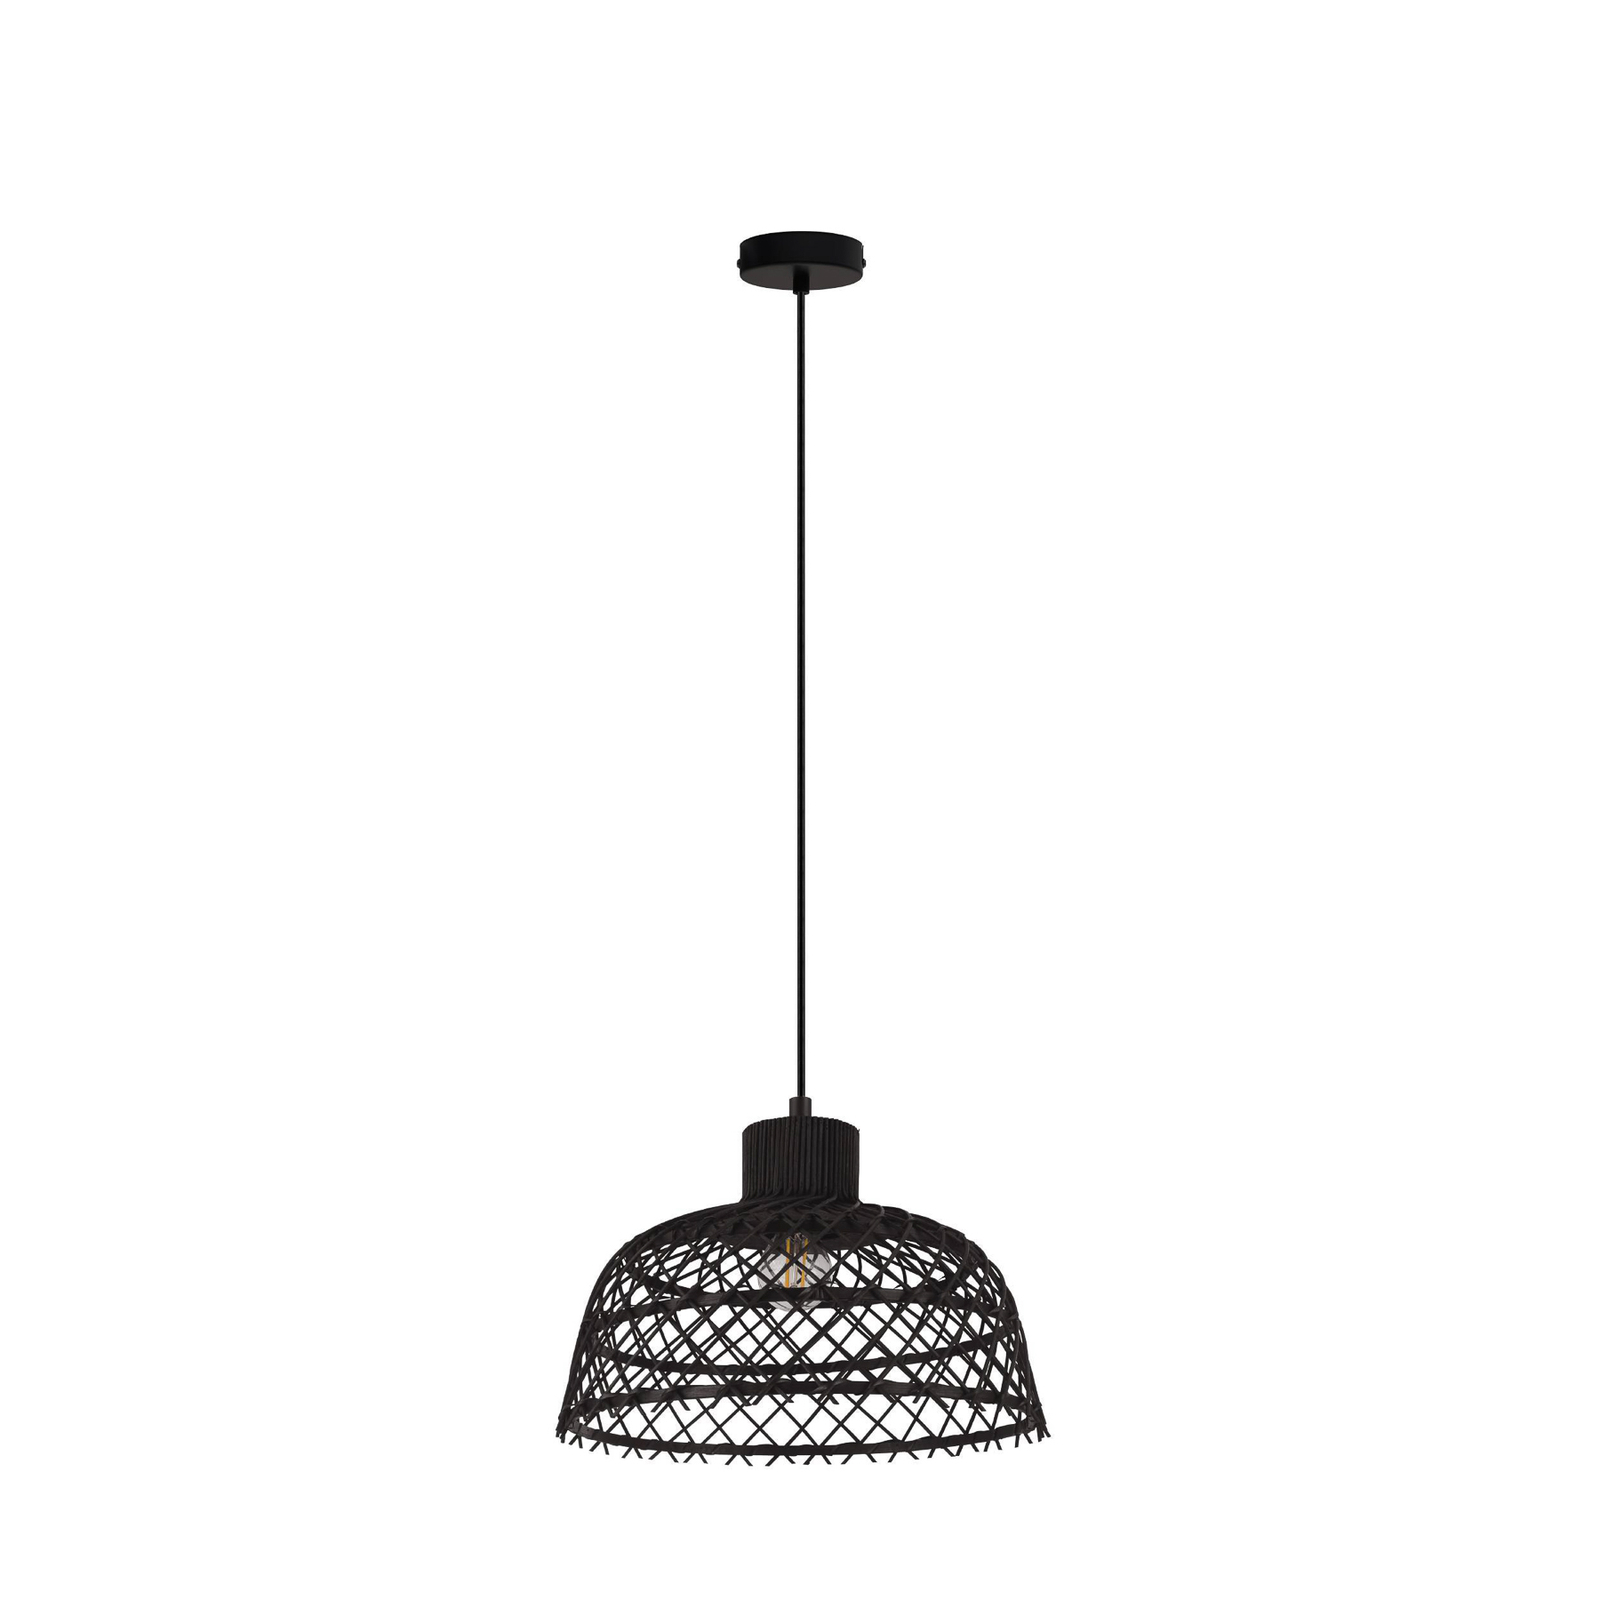 Ausnby hanging light made of wood, black